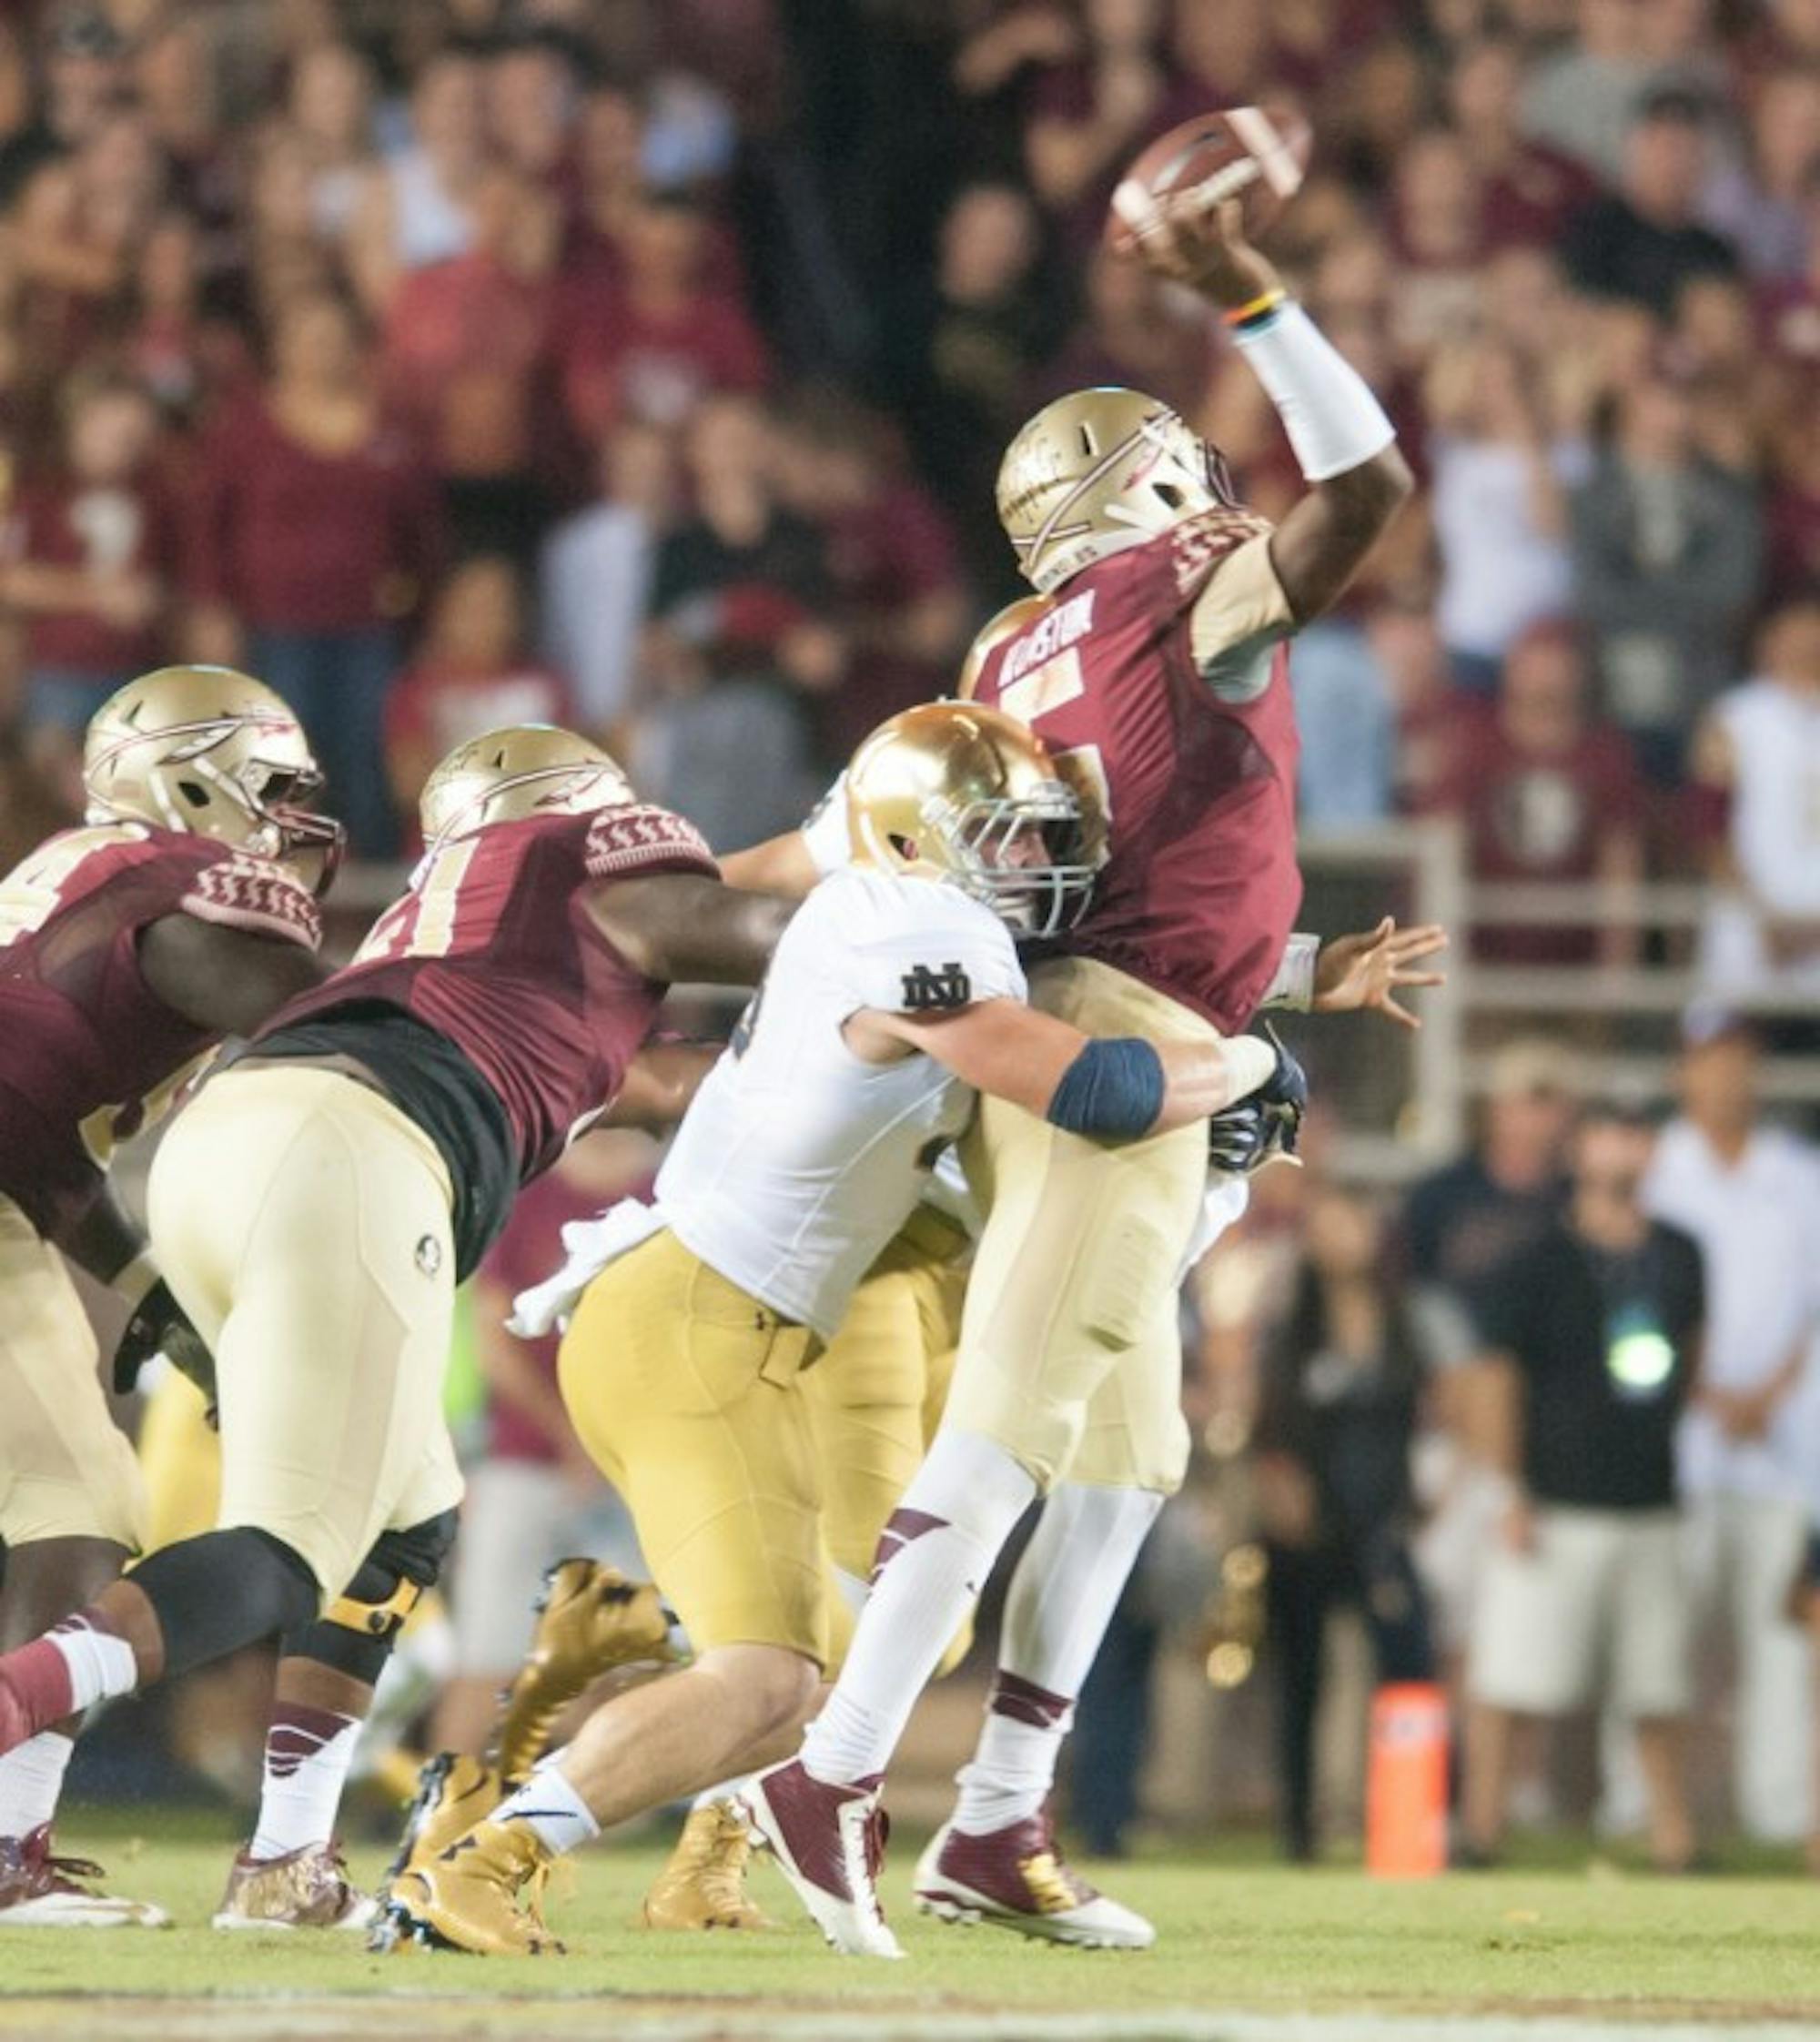 Senior Joe Schmidt gets a hit on Seminole sophomore quarterback Jameis Winston during Notre Dame's 31-27 loss against Florida State University on Oct. 18 at the Doak Cambell Stadium.